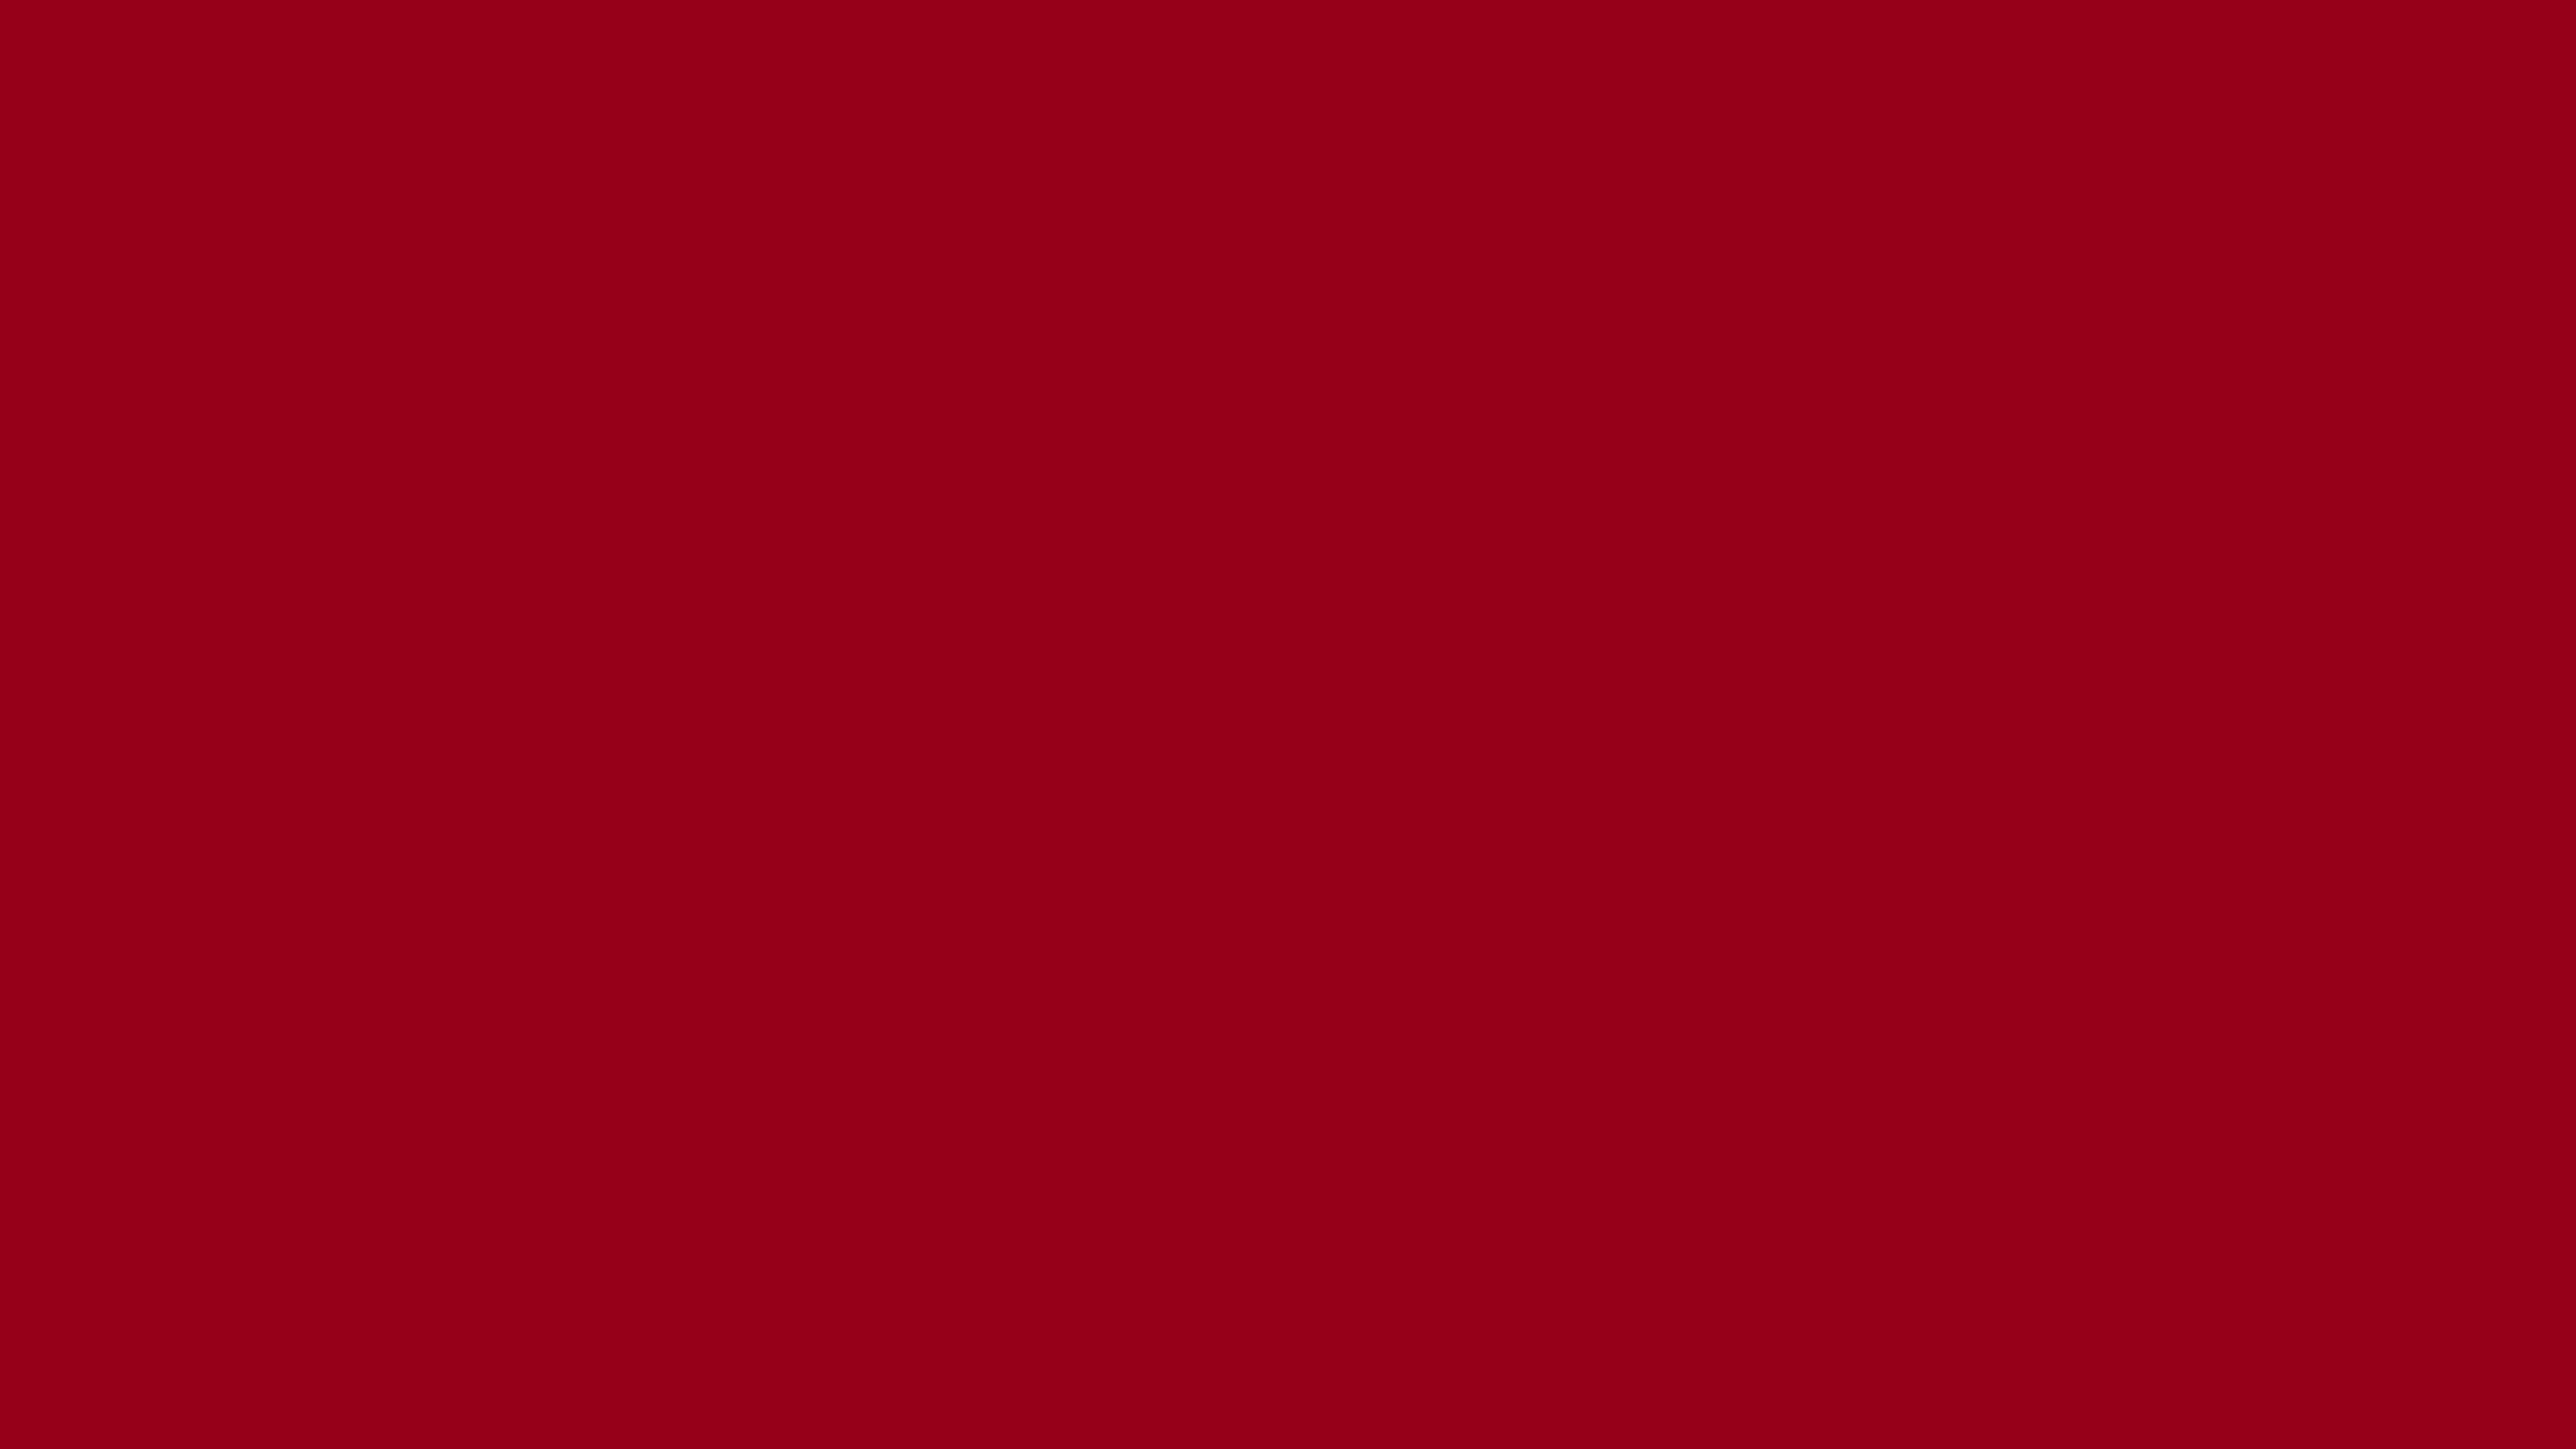 3840x2160 Carmine Solid Color Background